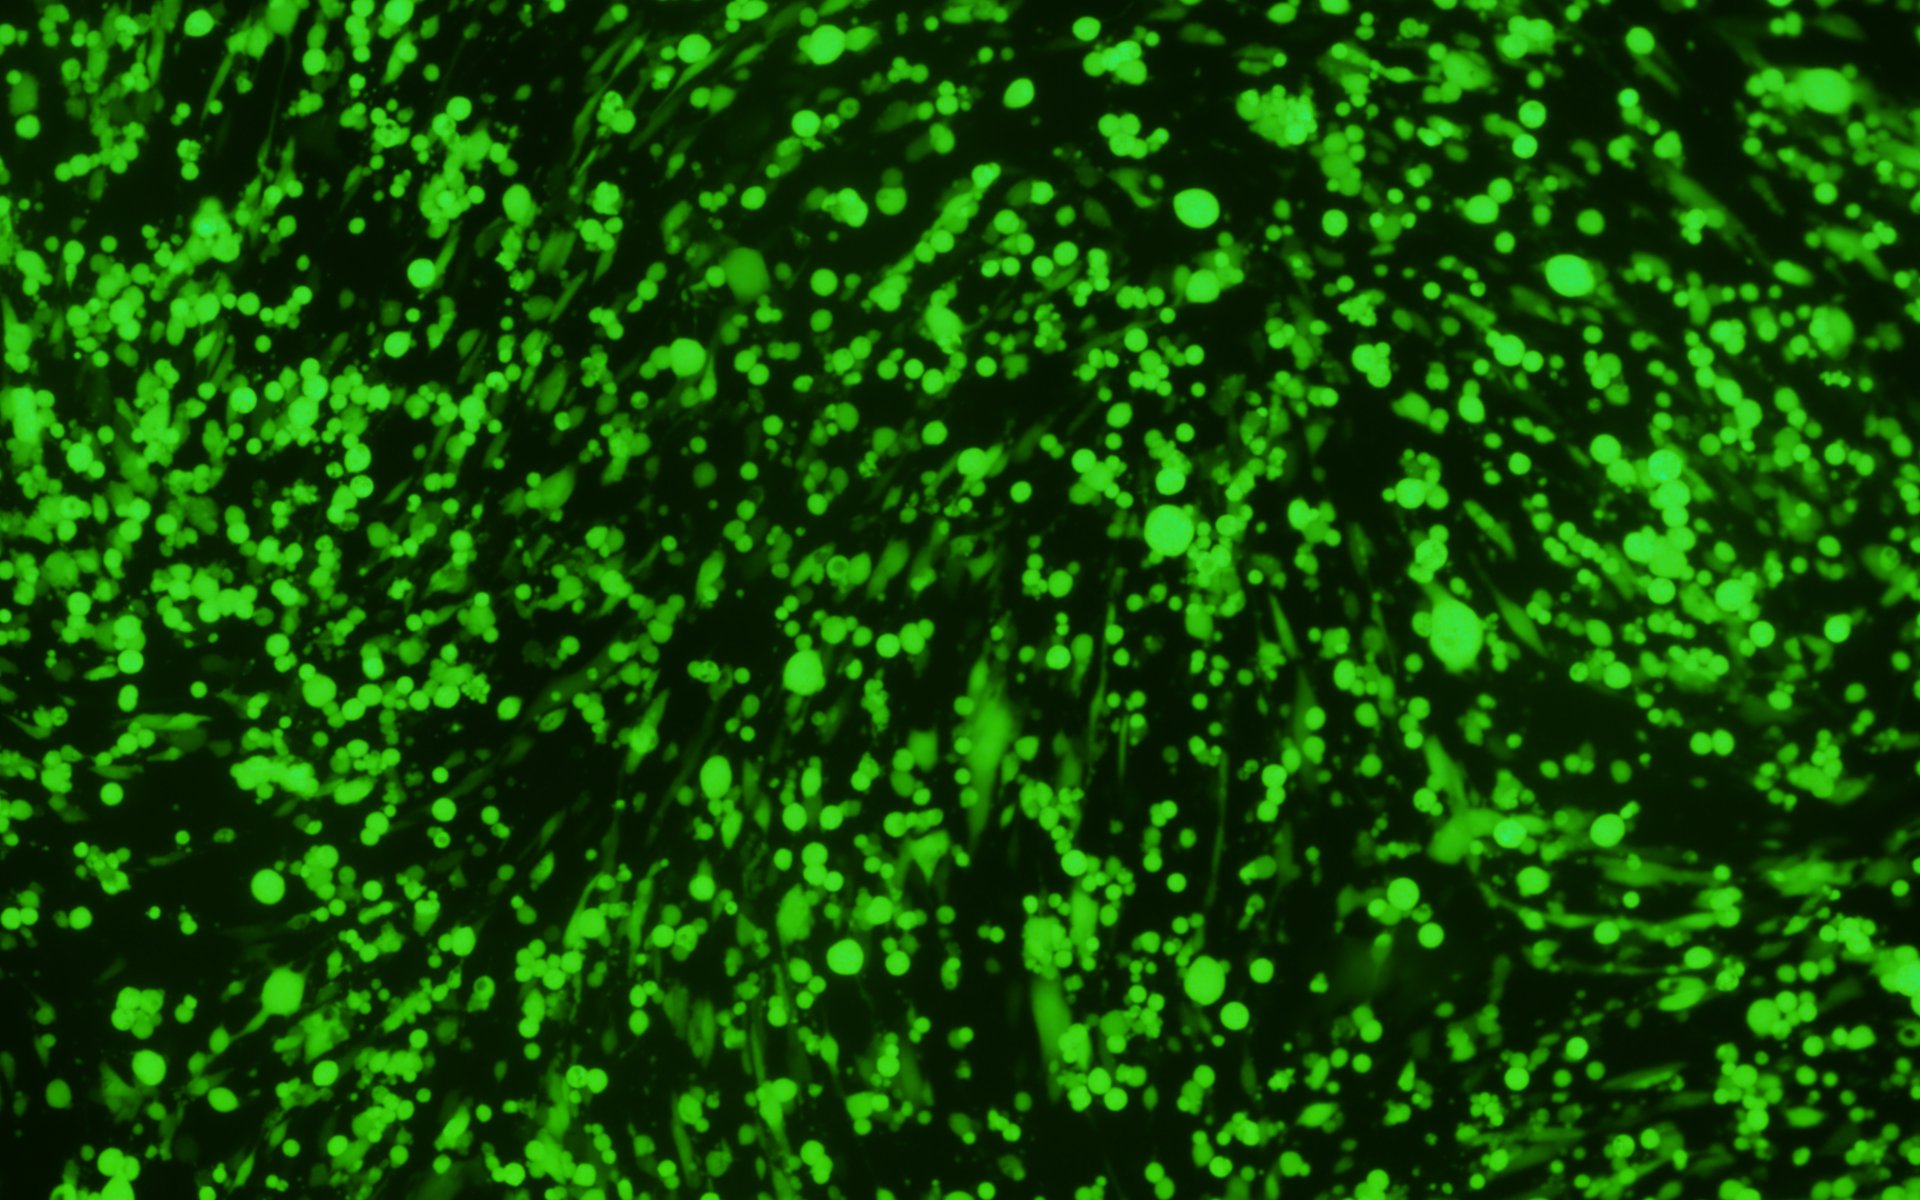 BHK-21 cells were transduced with VSV and presented strong EGFP fluorescent signal.